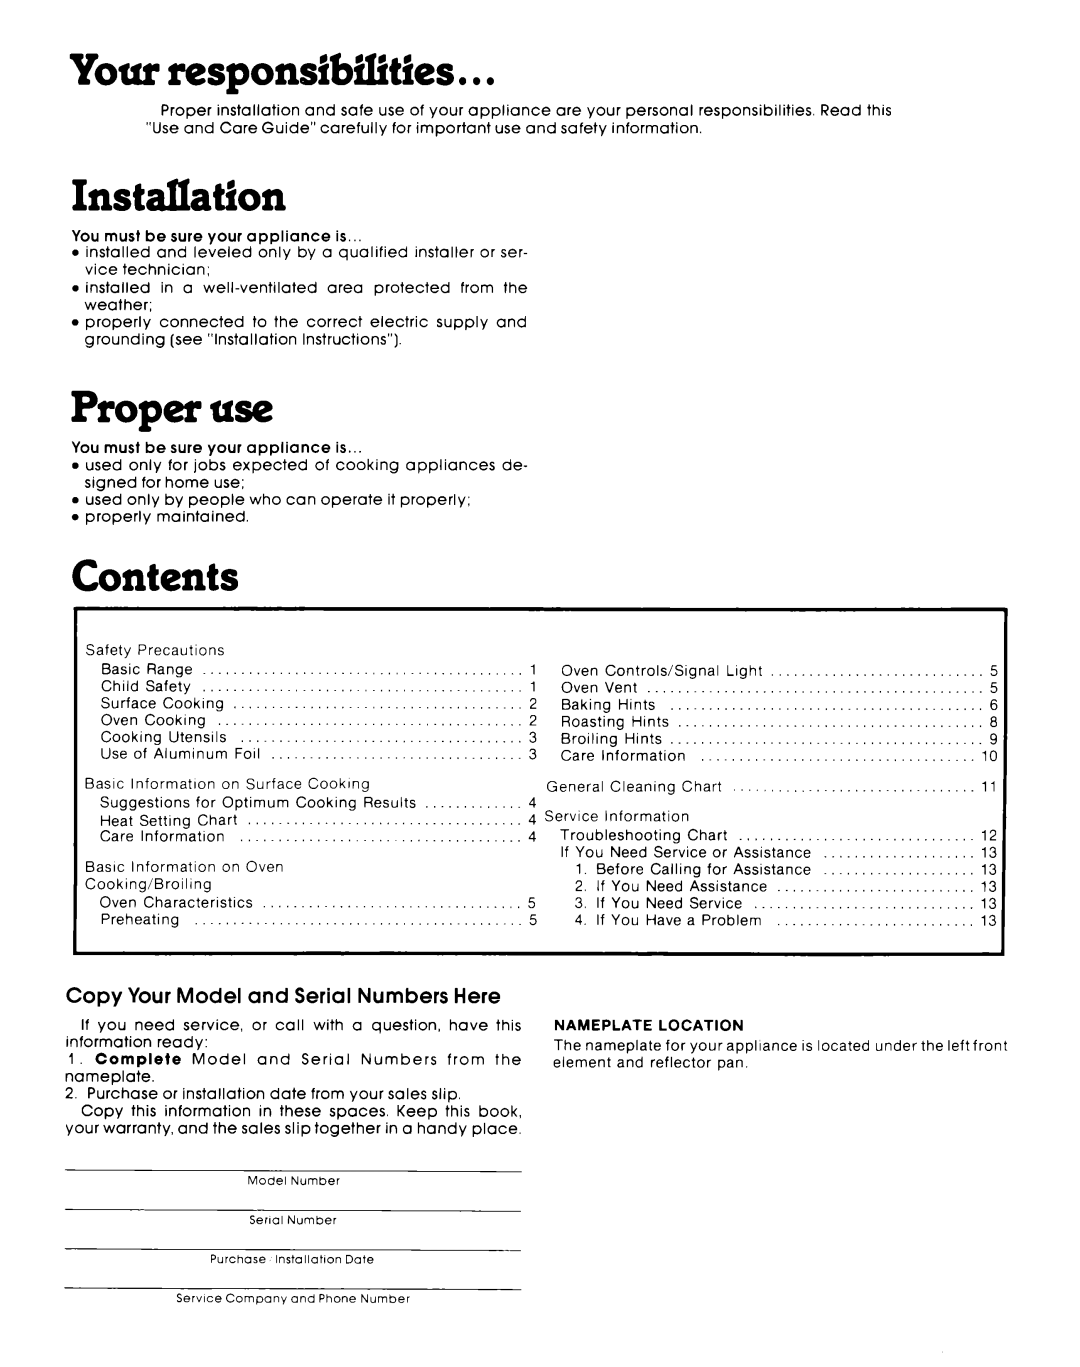 Whirlpool RF0100XKW0 manual Your responsibtlirtfes. l l, Installation, Proper use, Contents 